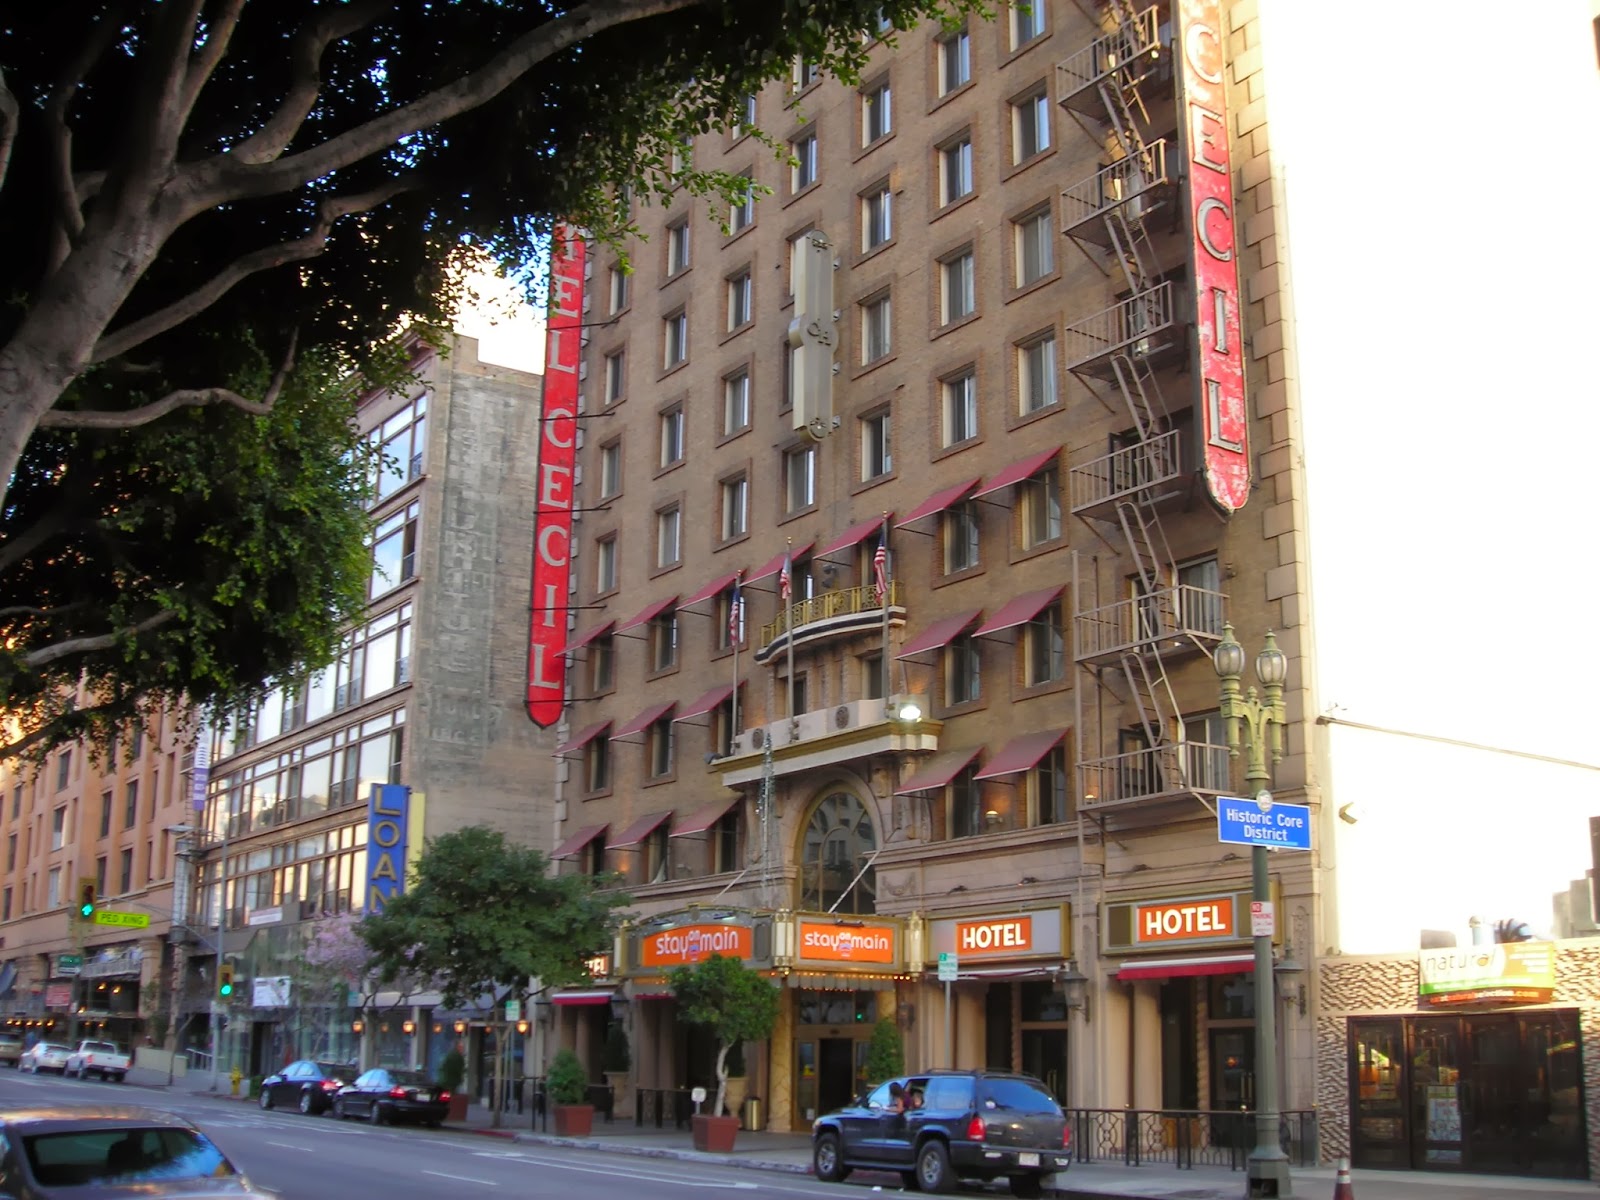 The Hotel Cecil opened in 1927. 